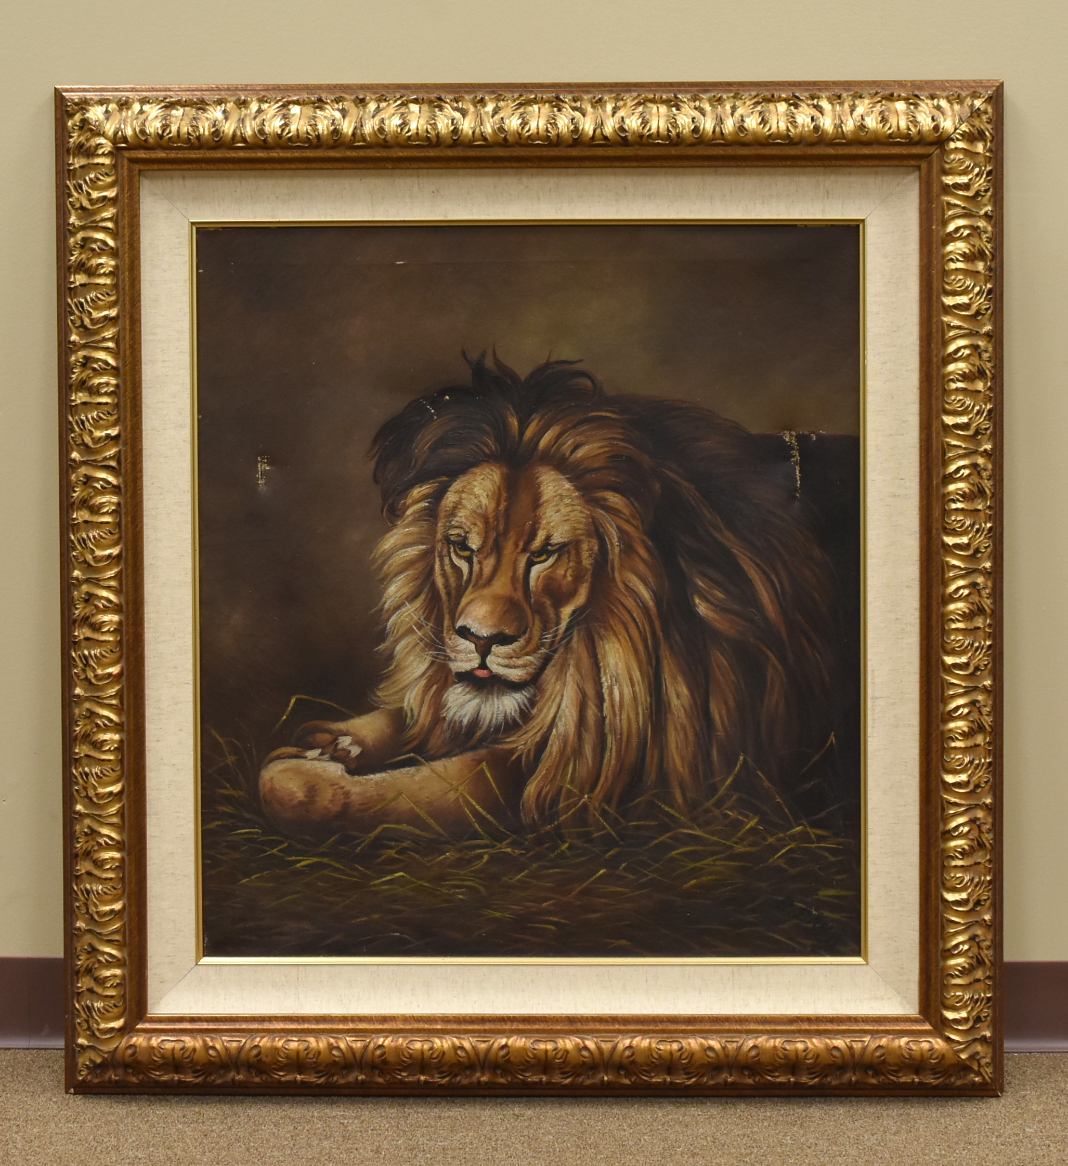 FRAMED OIL PAINTING OF A LION an 3b6290